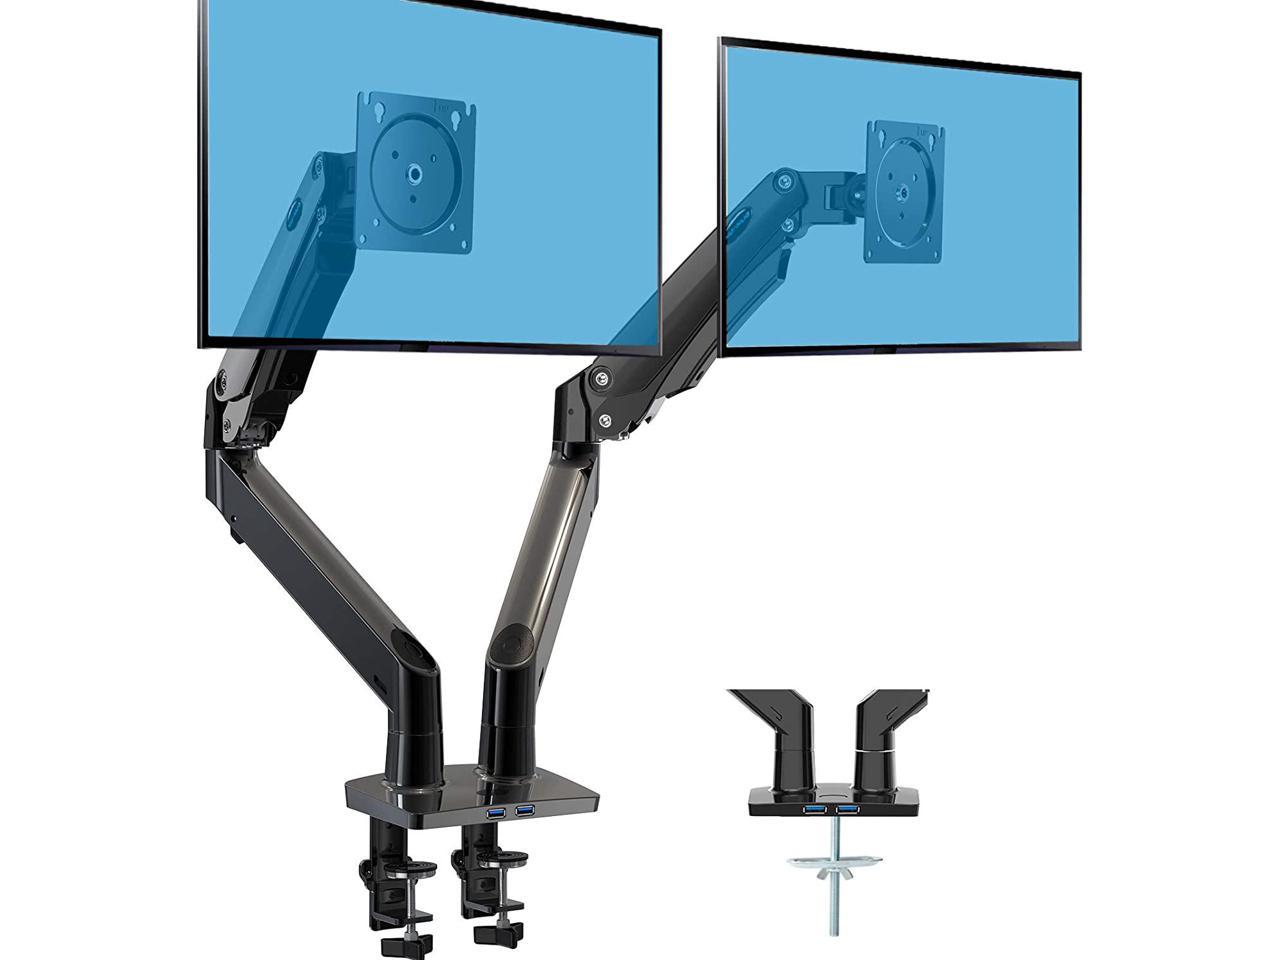 Huanuo Dual Monitor Stand (up to 35" / 26.4 lbs) Desk Mount (plus $5 Newegg GC) $75.99 with Free Shipping